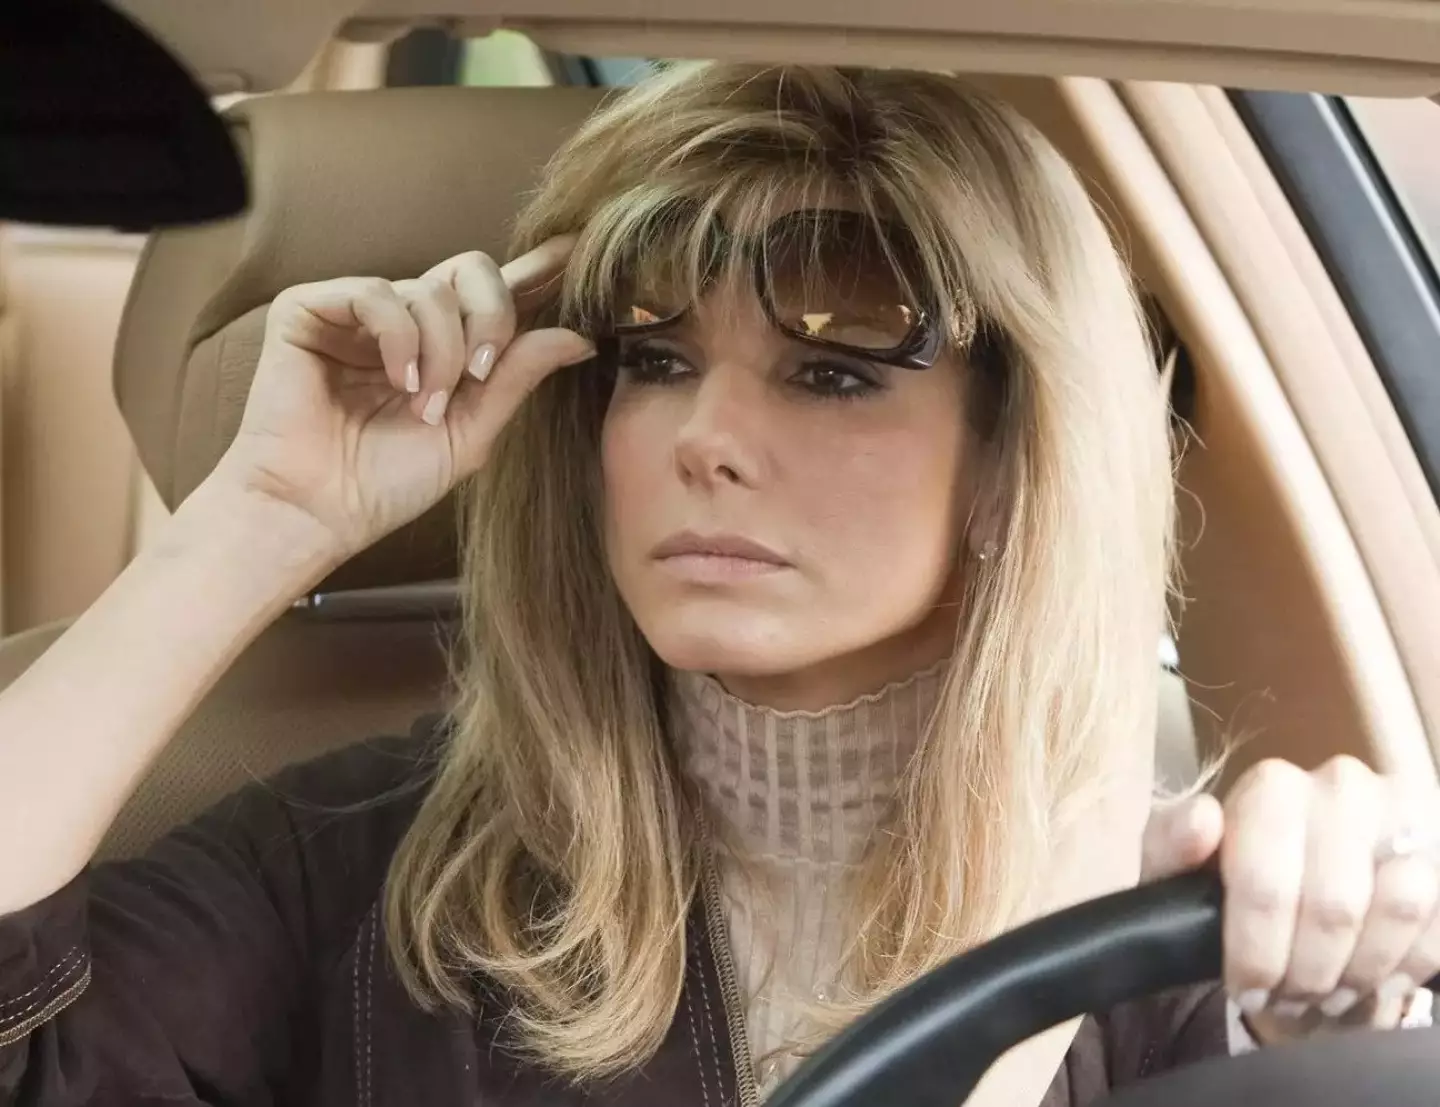 Sandra Bullock played Leigh Anne Tuohy in The Blind Side.